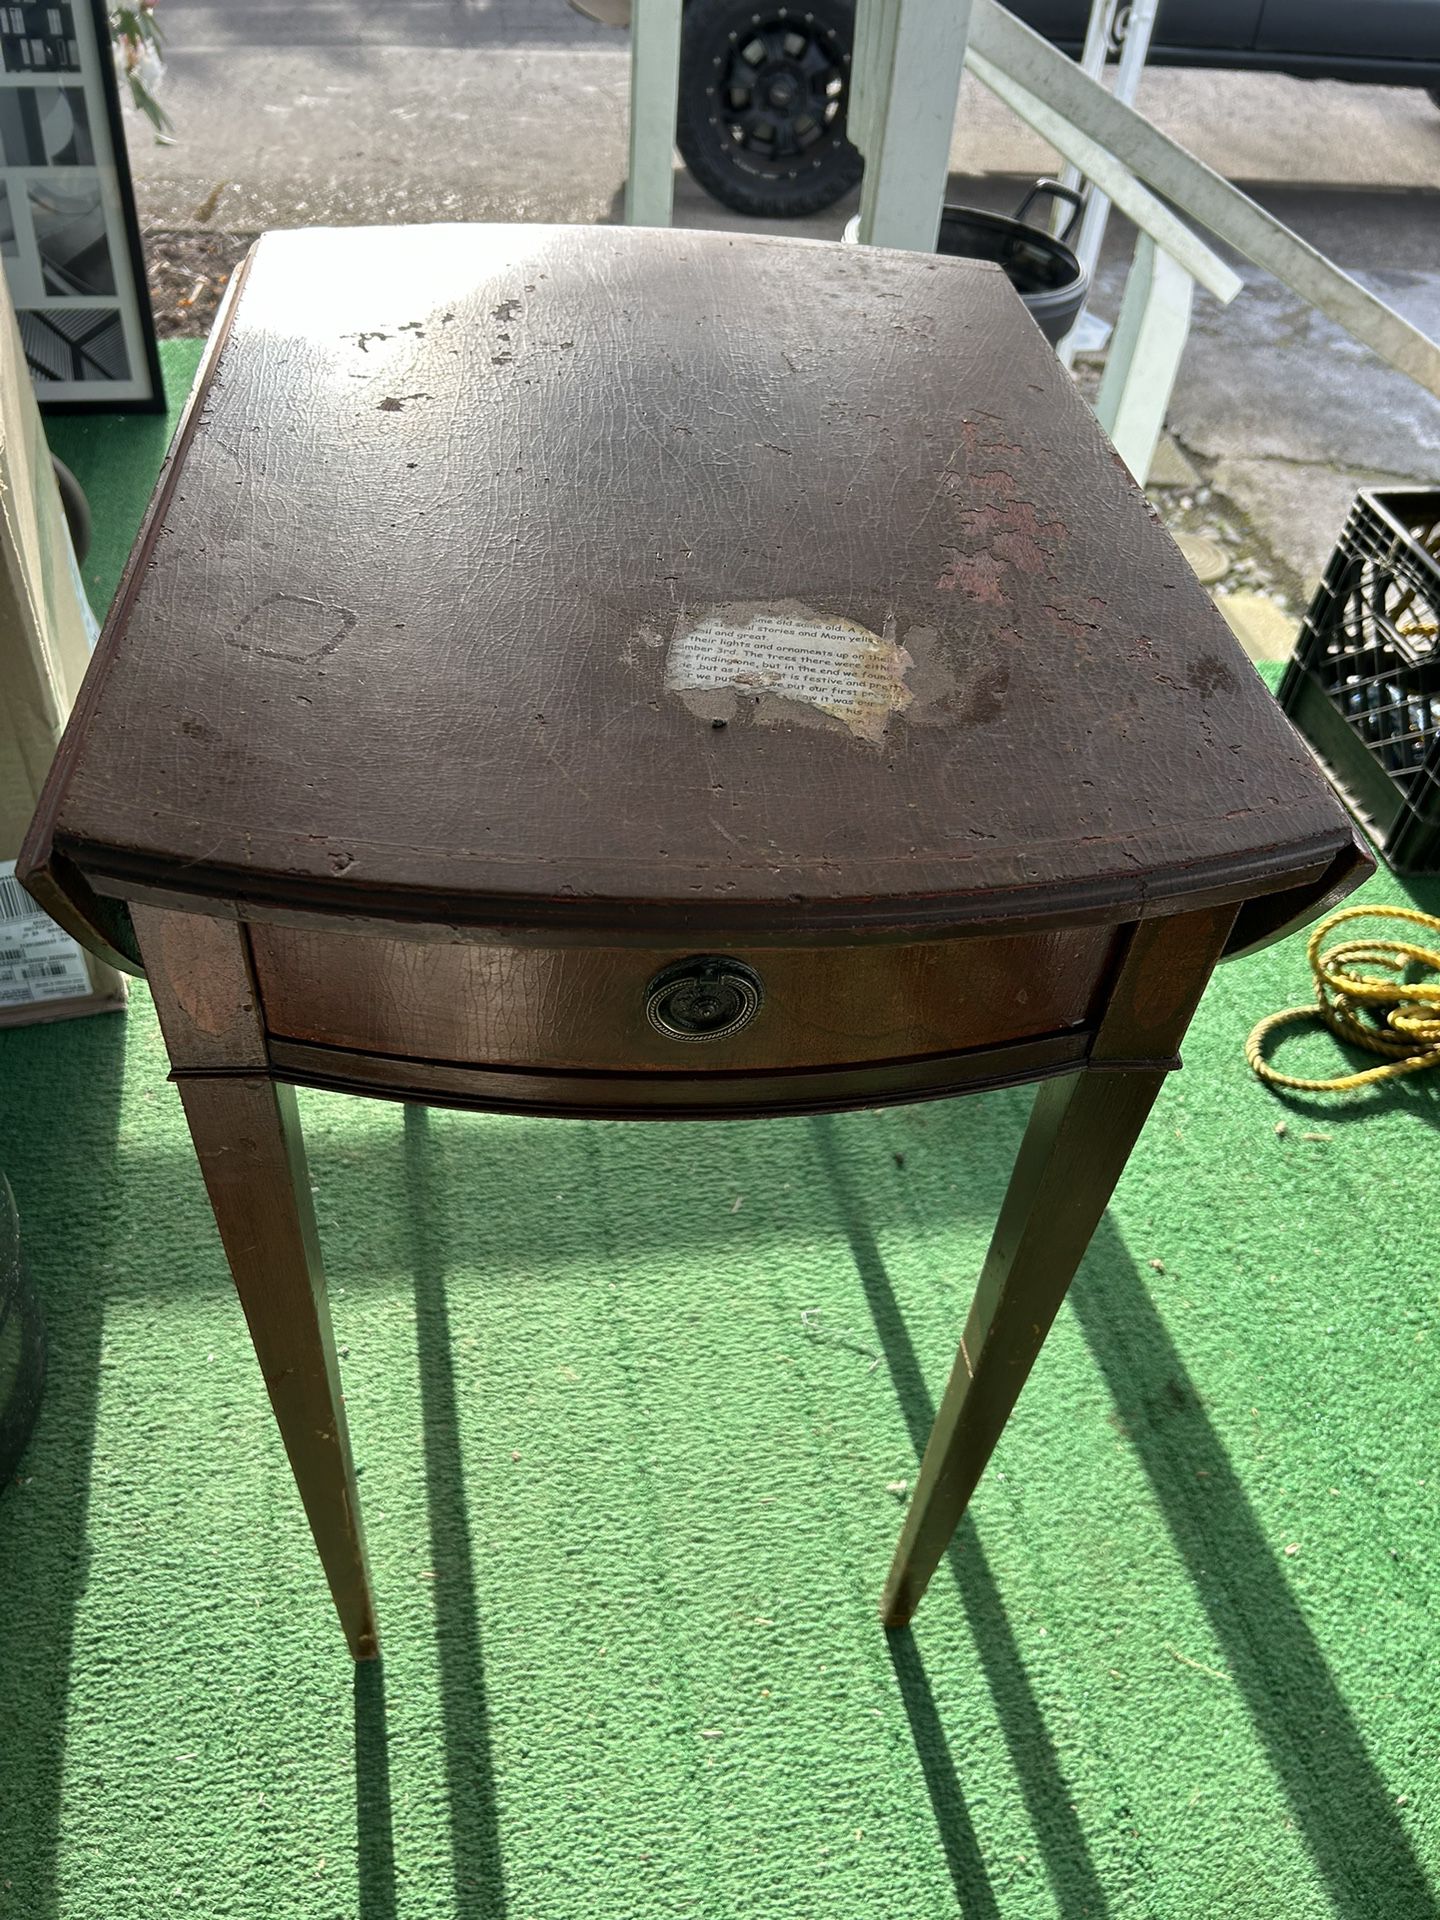 Antique Table - Two Piece Folding